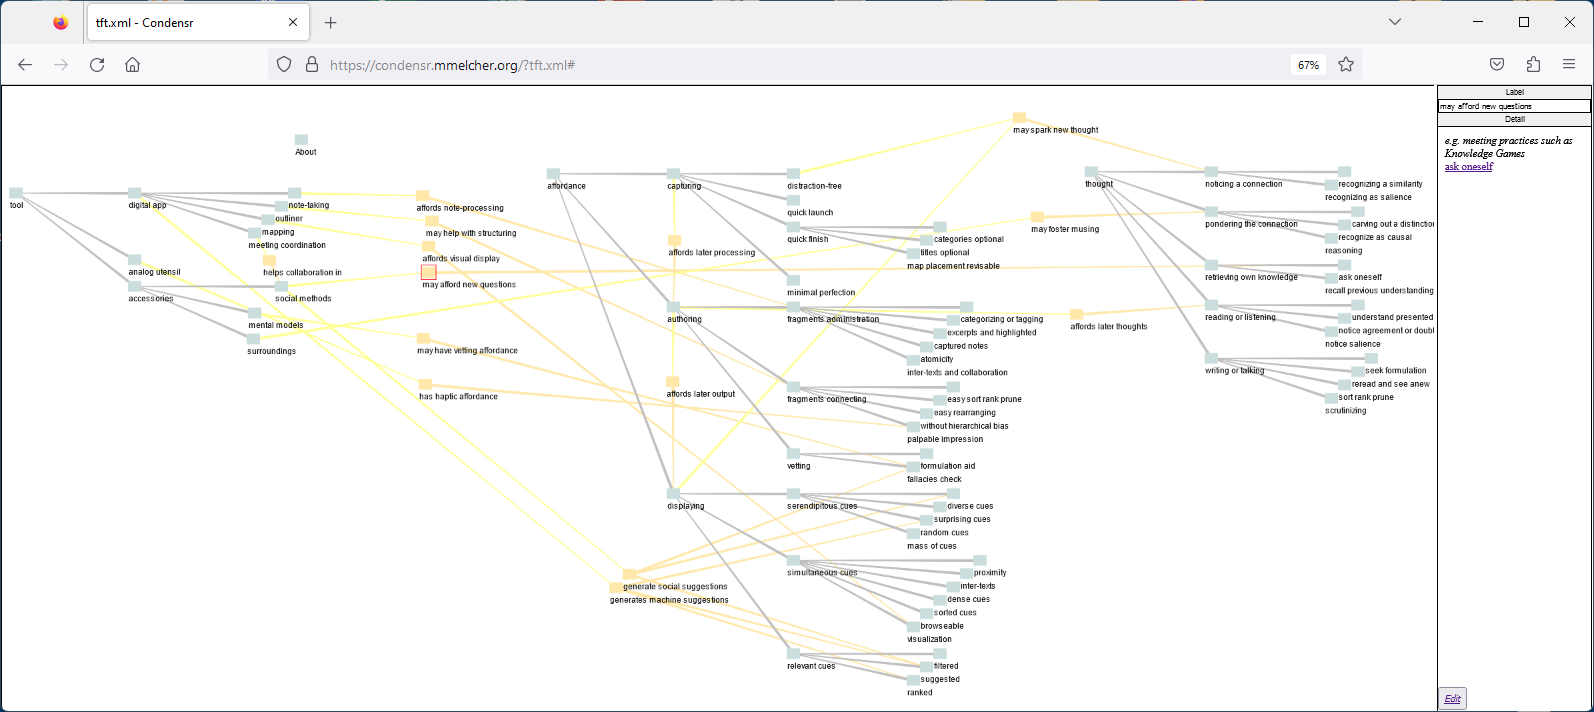 A screenshot of a mapping app that shows ontology concepts such as tools, affordances and thoughts, plus the 'ObjectProperties' with arrows.